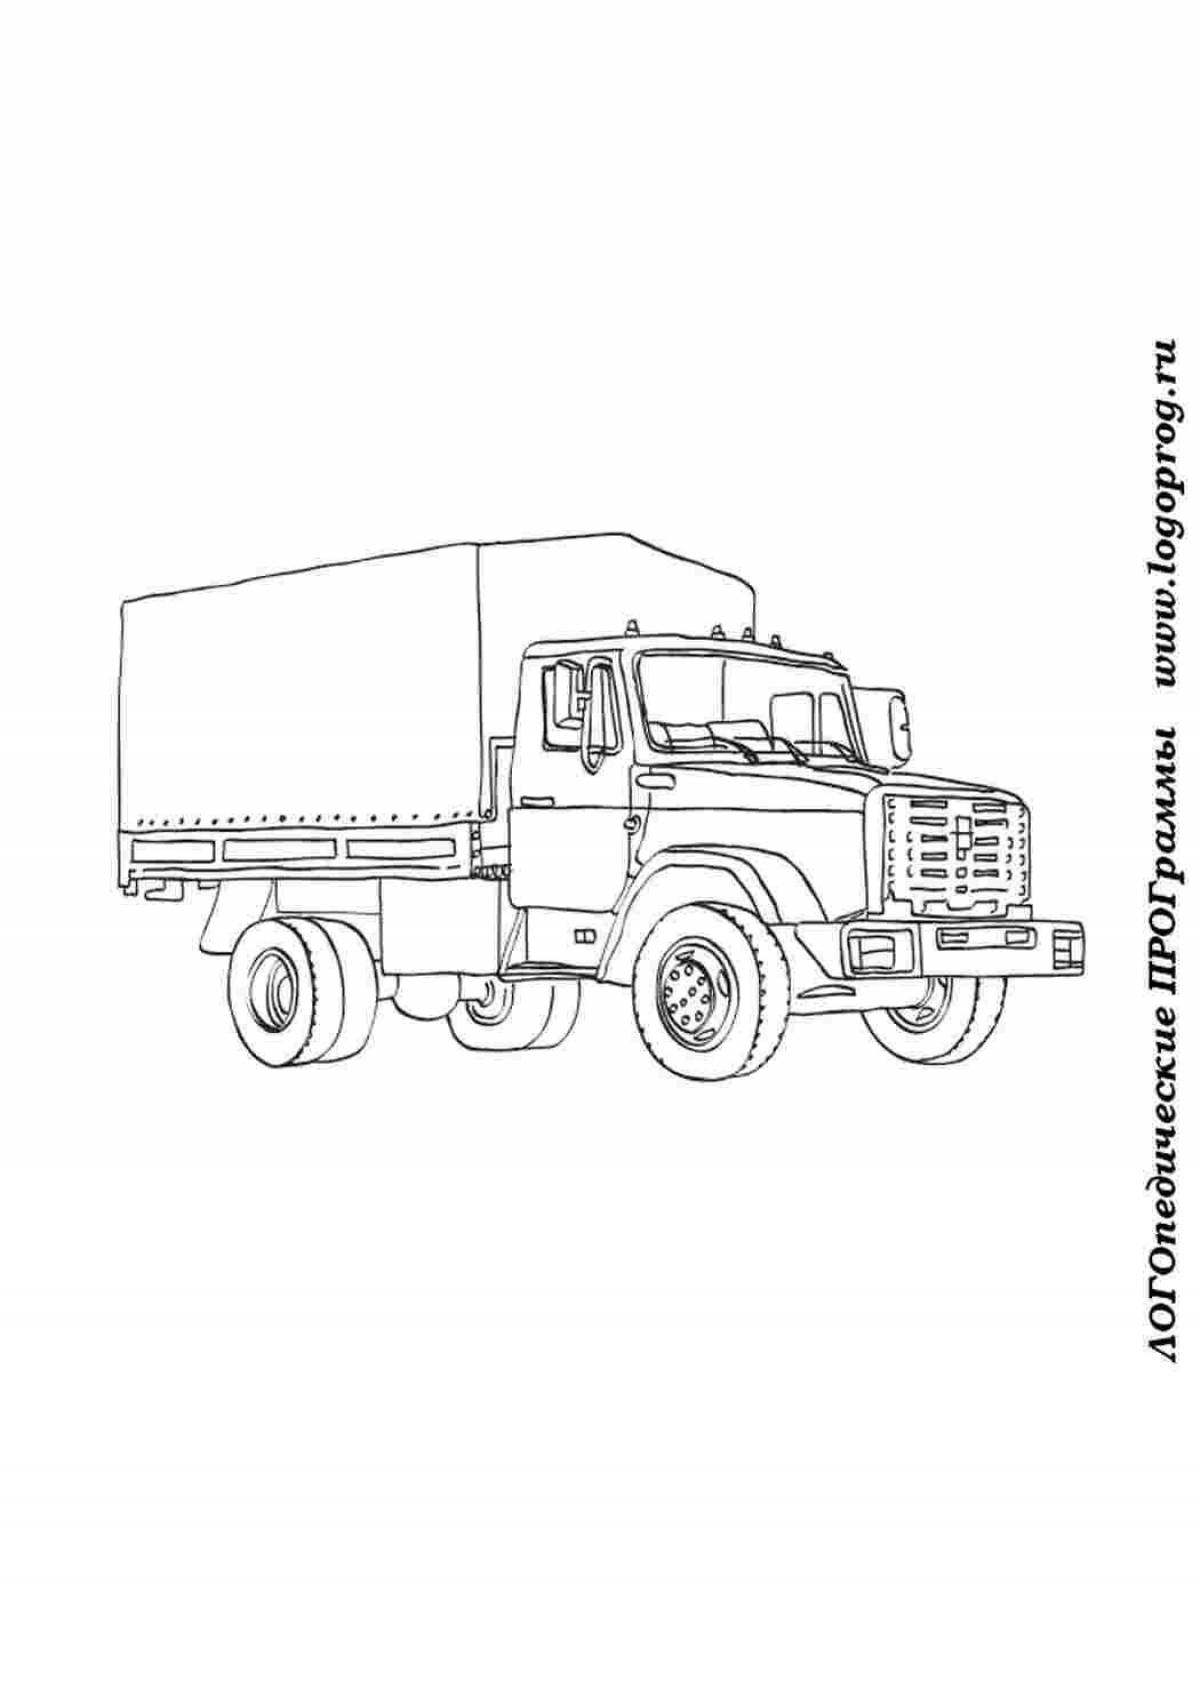 Charming Soviet cars coloring book